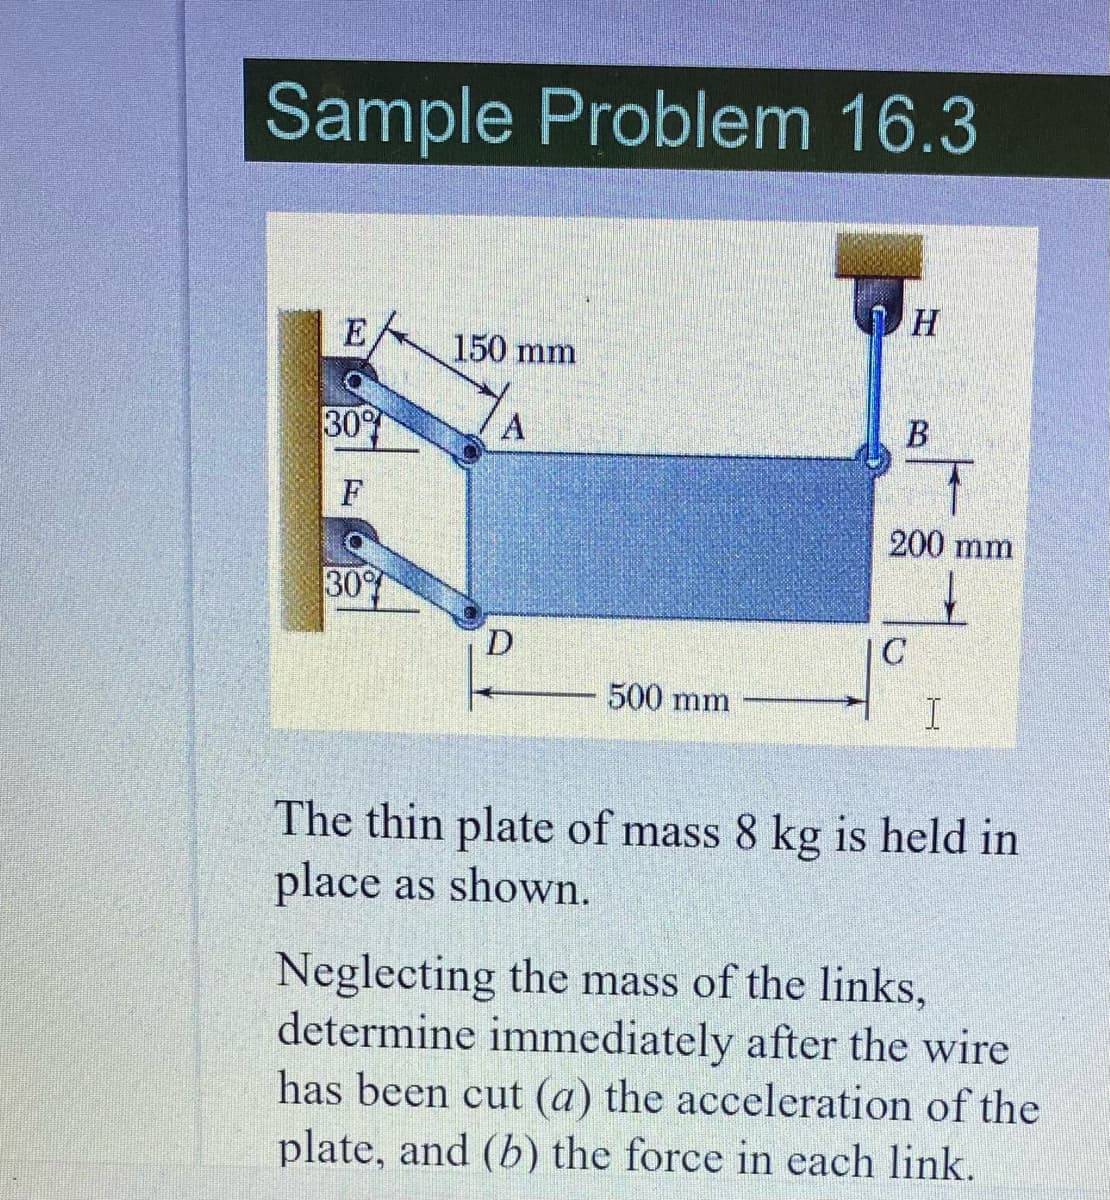 Sample Problem 16.3
150 mm
30
B
F
200 mm
30%
D
500 mm
The thin plate of mass 8 kg is held in
place as shown.
Neglecting the mass of the links,
determine immediately after the wire
has been cut (a) the acceleration of the
plate, and (b) the force in each link.
